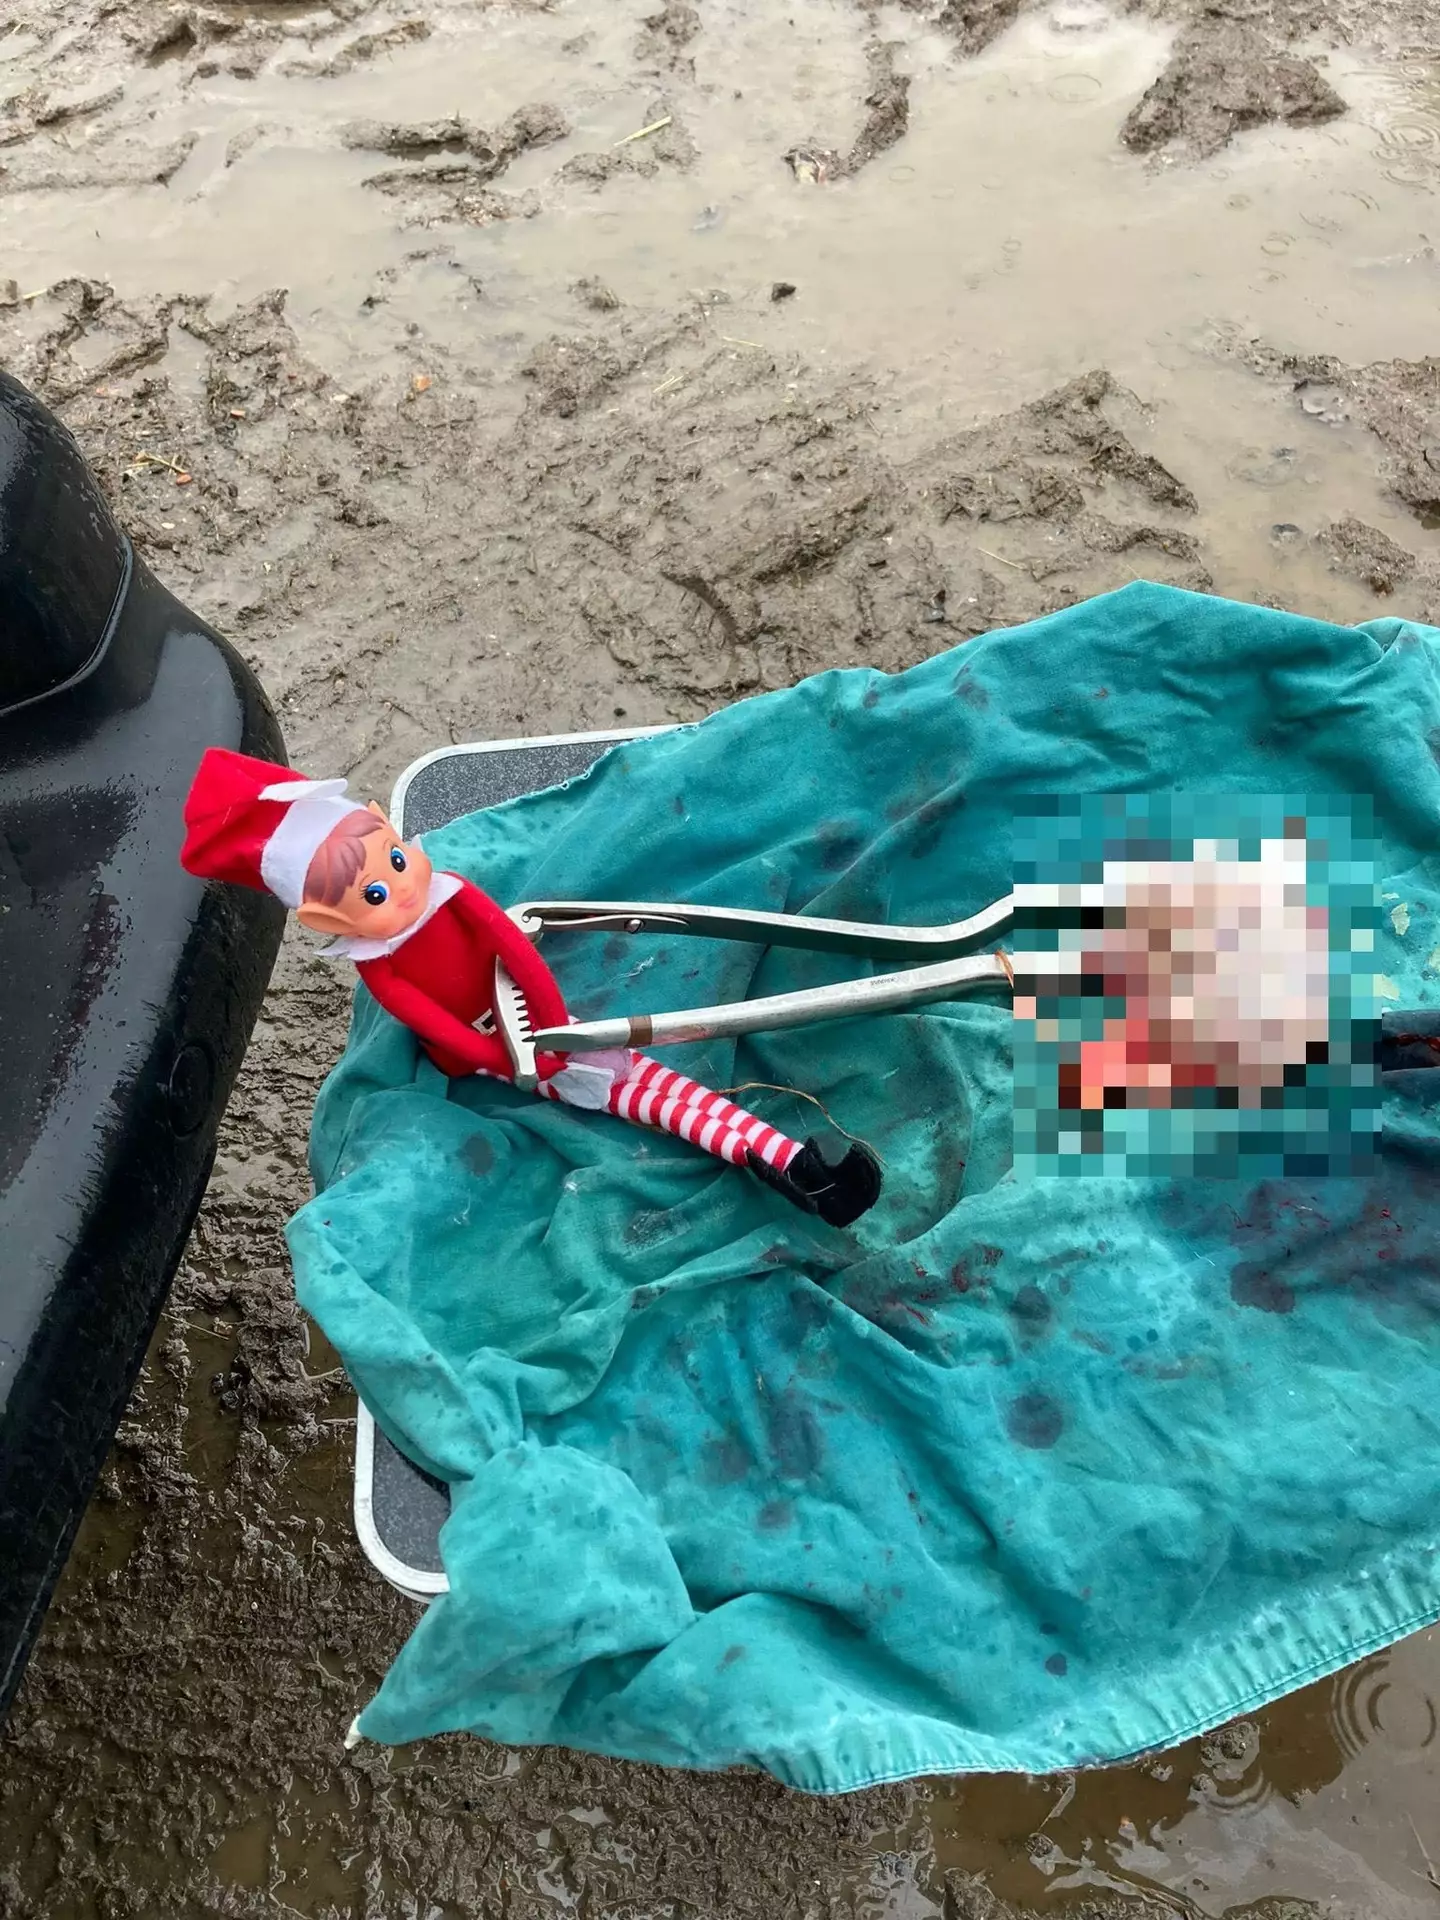 Lingfield Equine Vets' naughty Elf got involved with a horse castration.